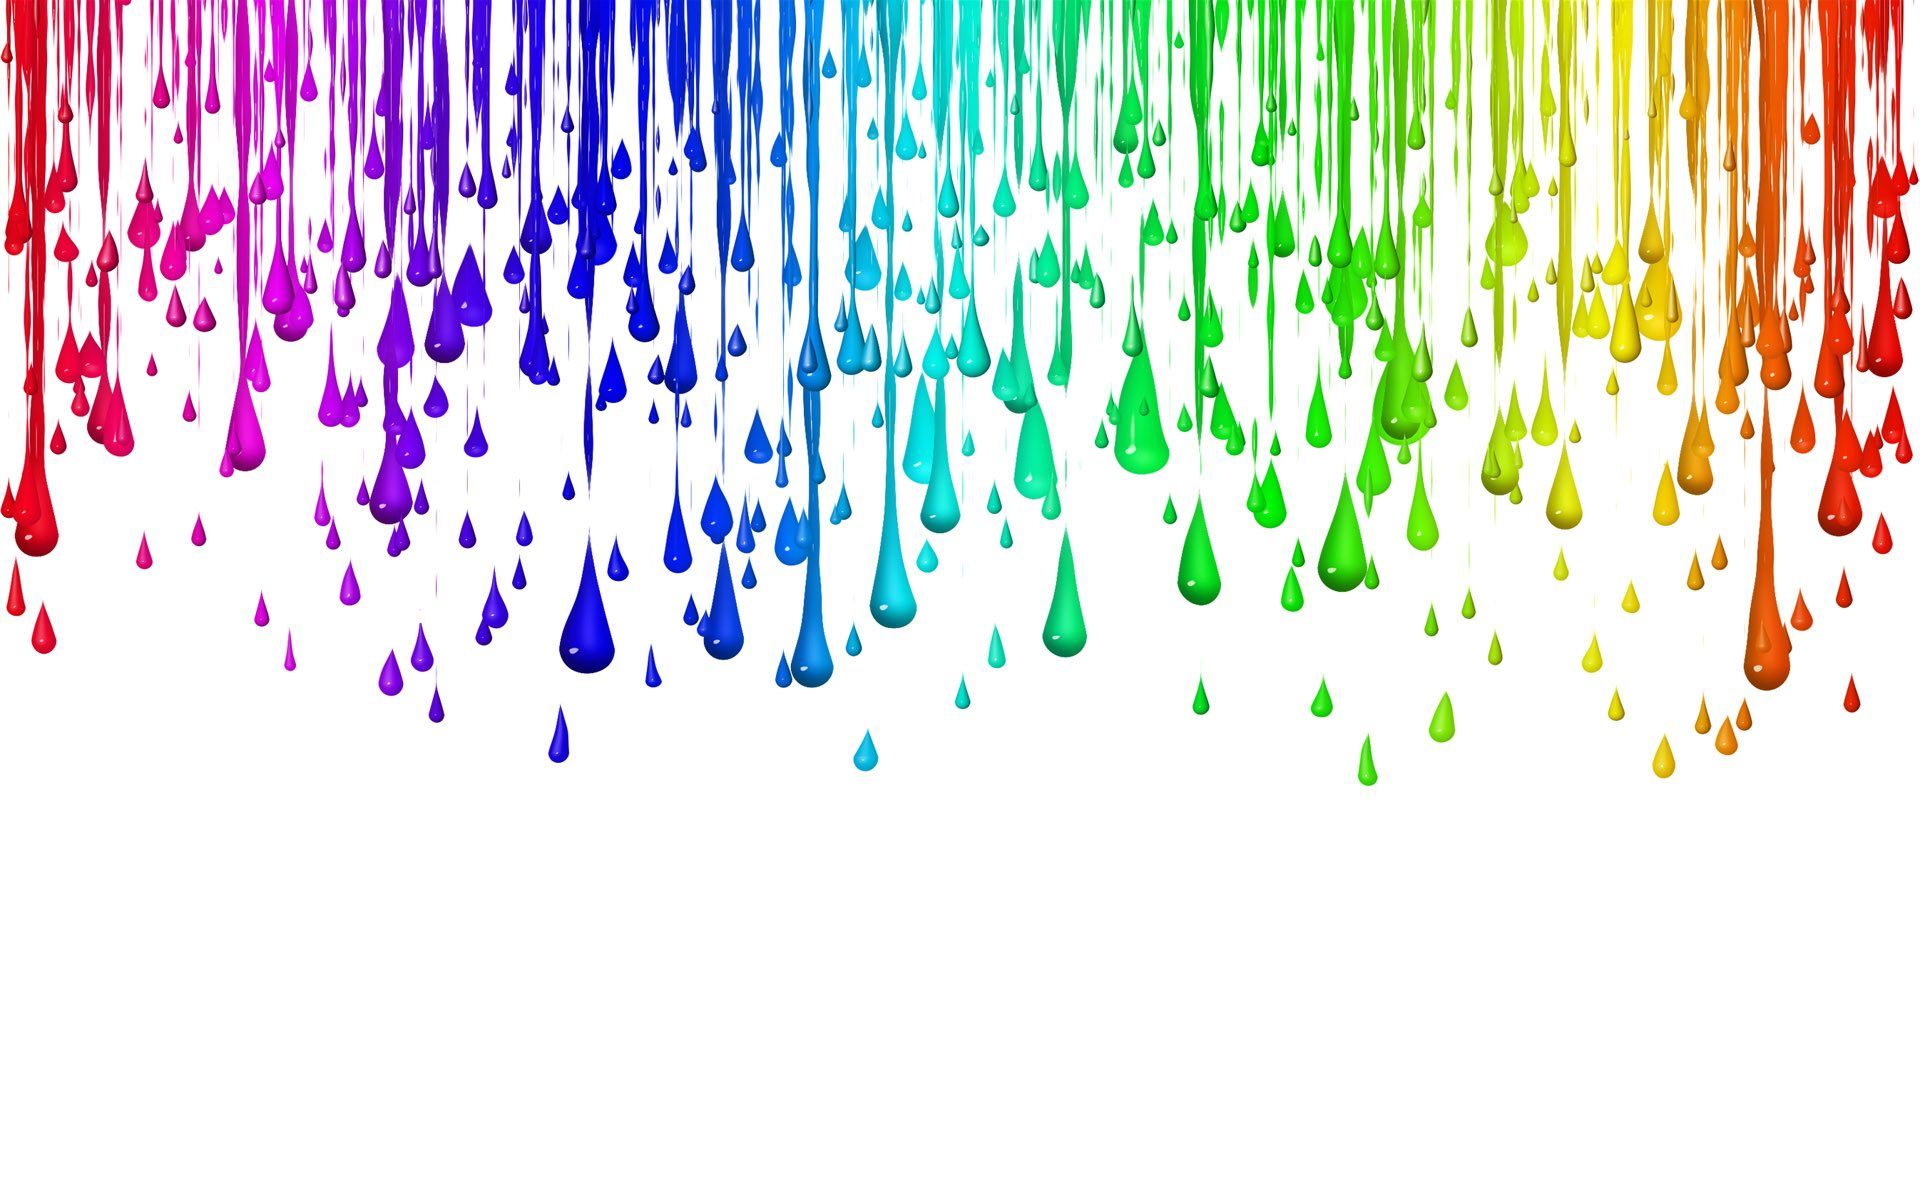 Colorful Drops of Water Wallpaper Background Wallpaper HD. Rainbow paint, Cool colorful background, Colorful background